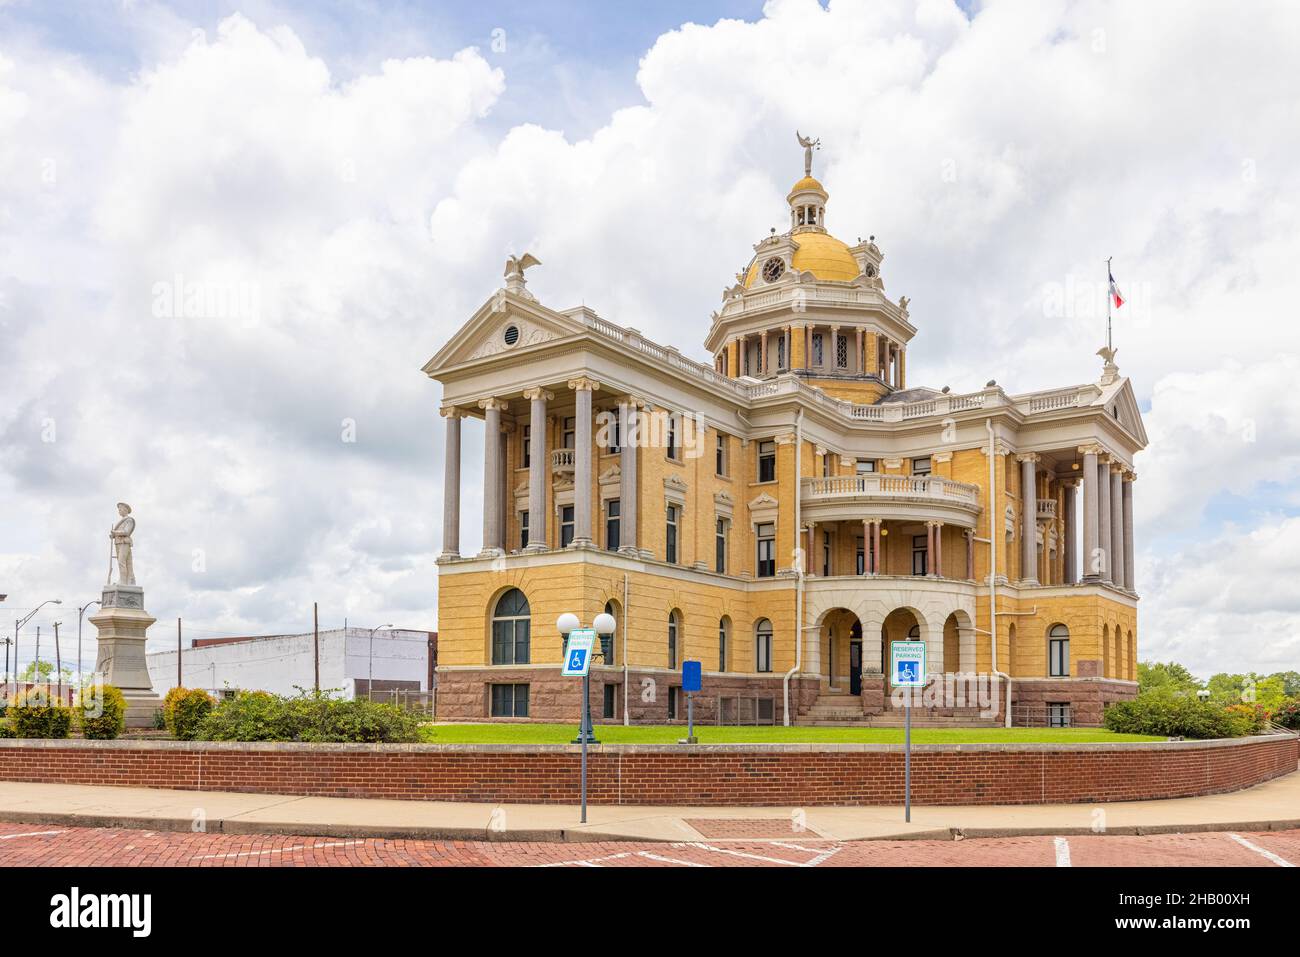 Marshall, Texas, USA - June 28, 2021: The Harrison County Courthouse Stock Photo